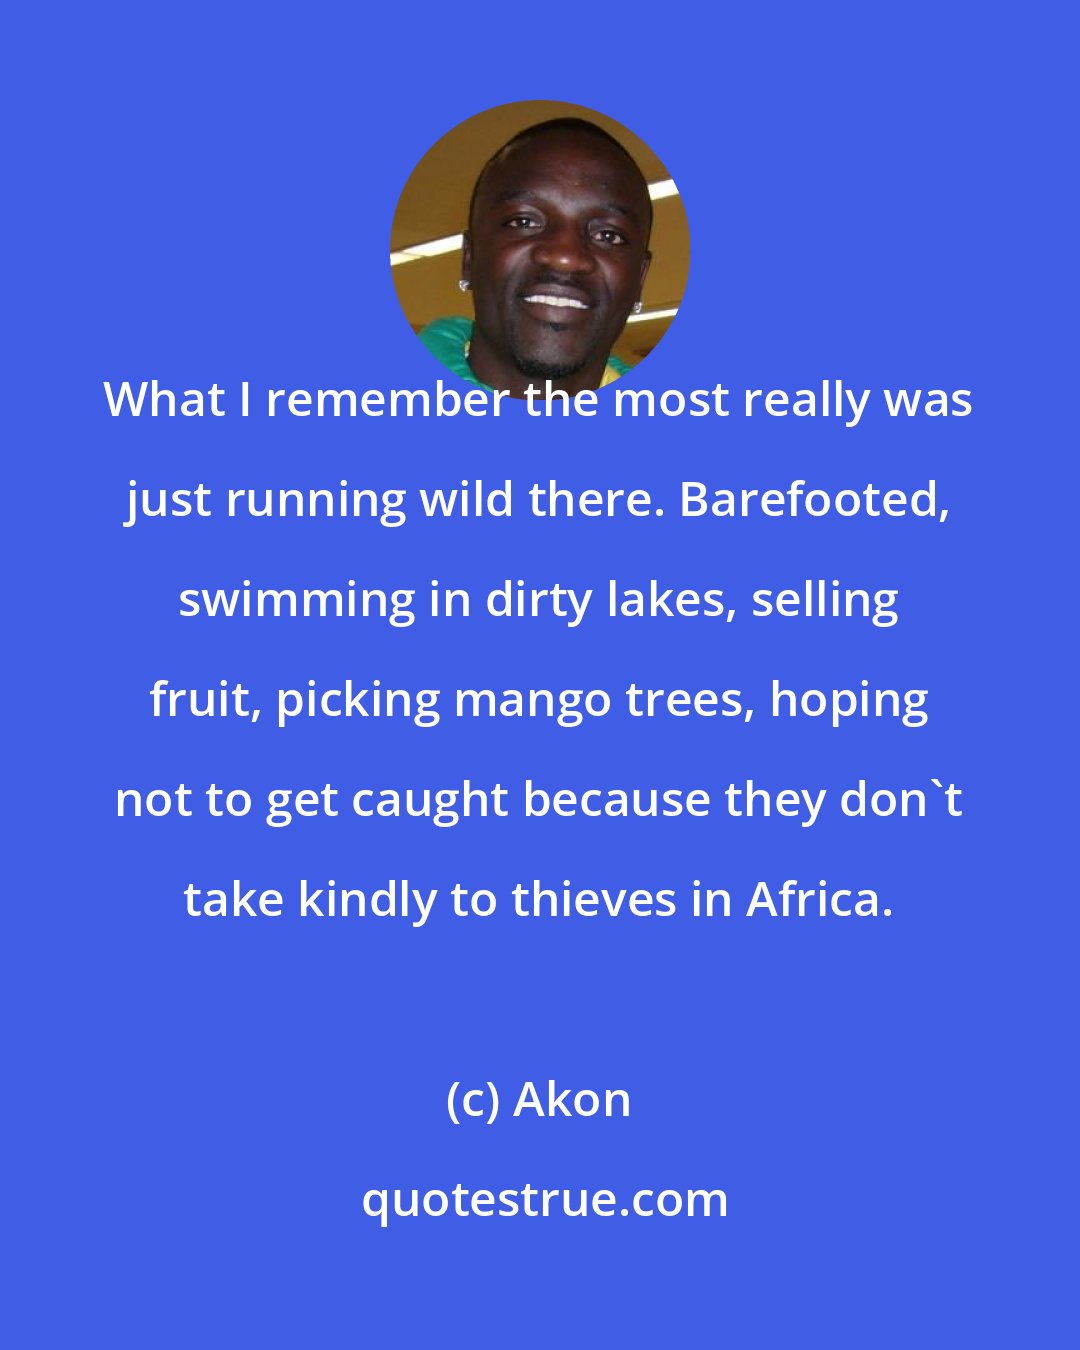 Akon: What I remember the most really was just running wild there. Barefooted, swimming in dirty lakes, selling fruit, picking mango trees, hoping not to get caught because they don't take kindly to thieves in Africa.